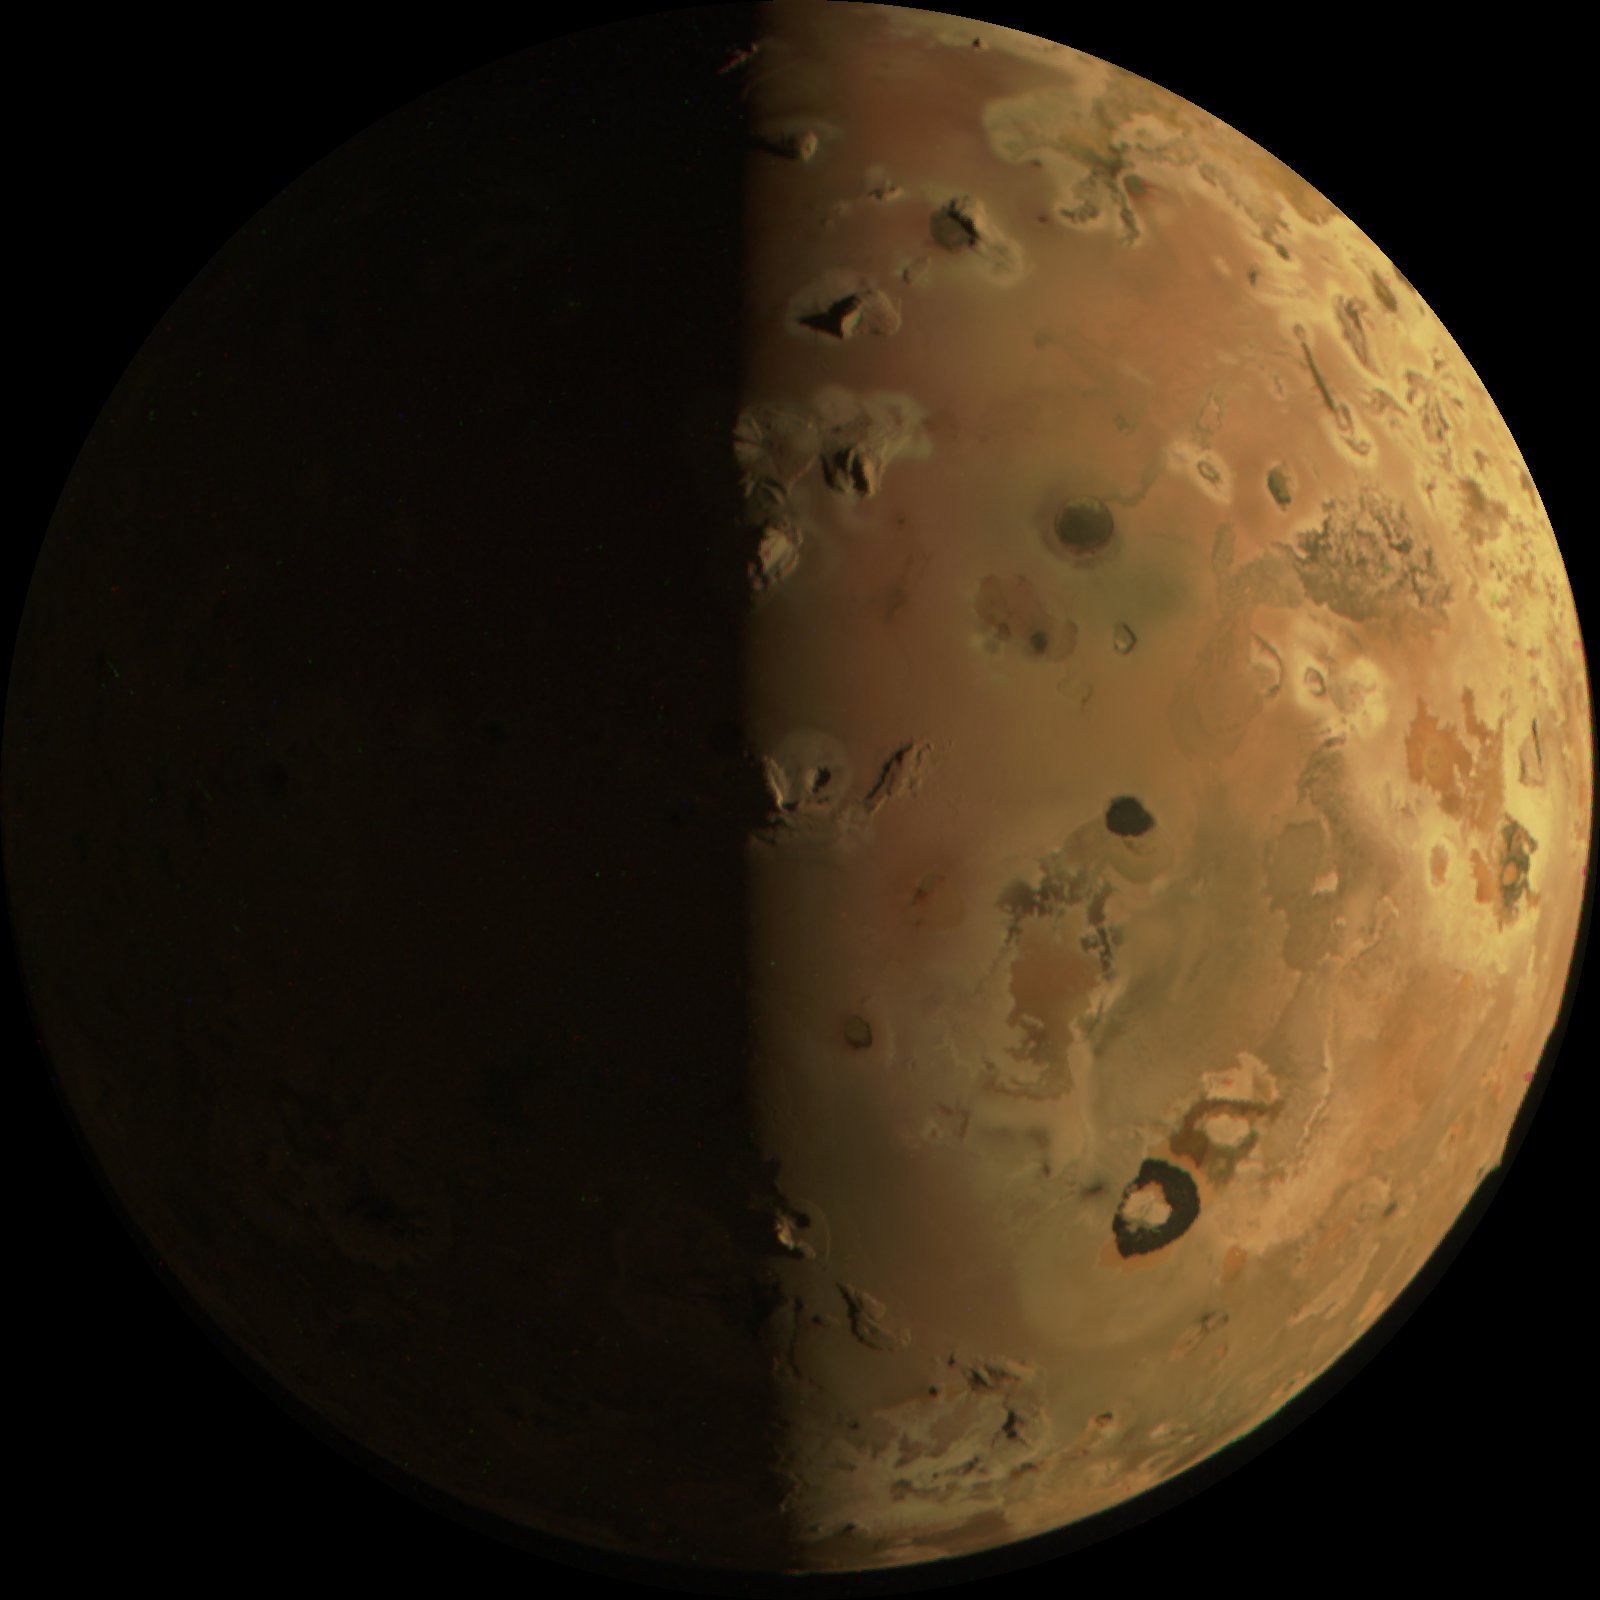 On December 30, 2023, the Juno spacecraft flew within roughly 930 miles of the moon Io. The spacecraftâs JunoCam imager captured images of a red sphere dotted with volcanoes. CREDIT: NASA/SwRI/MSSS